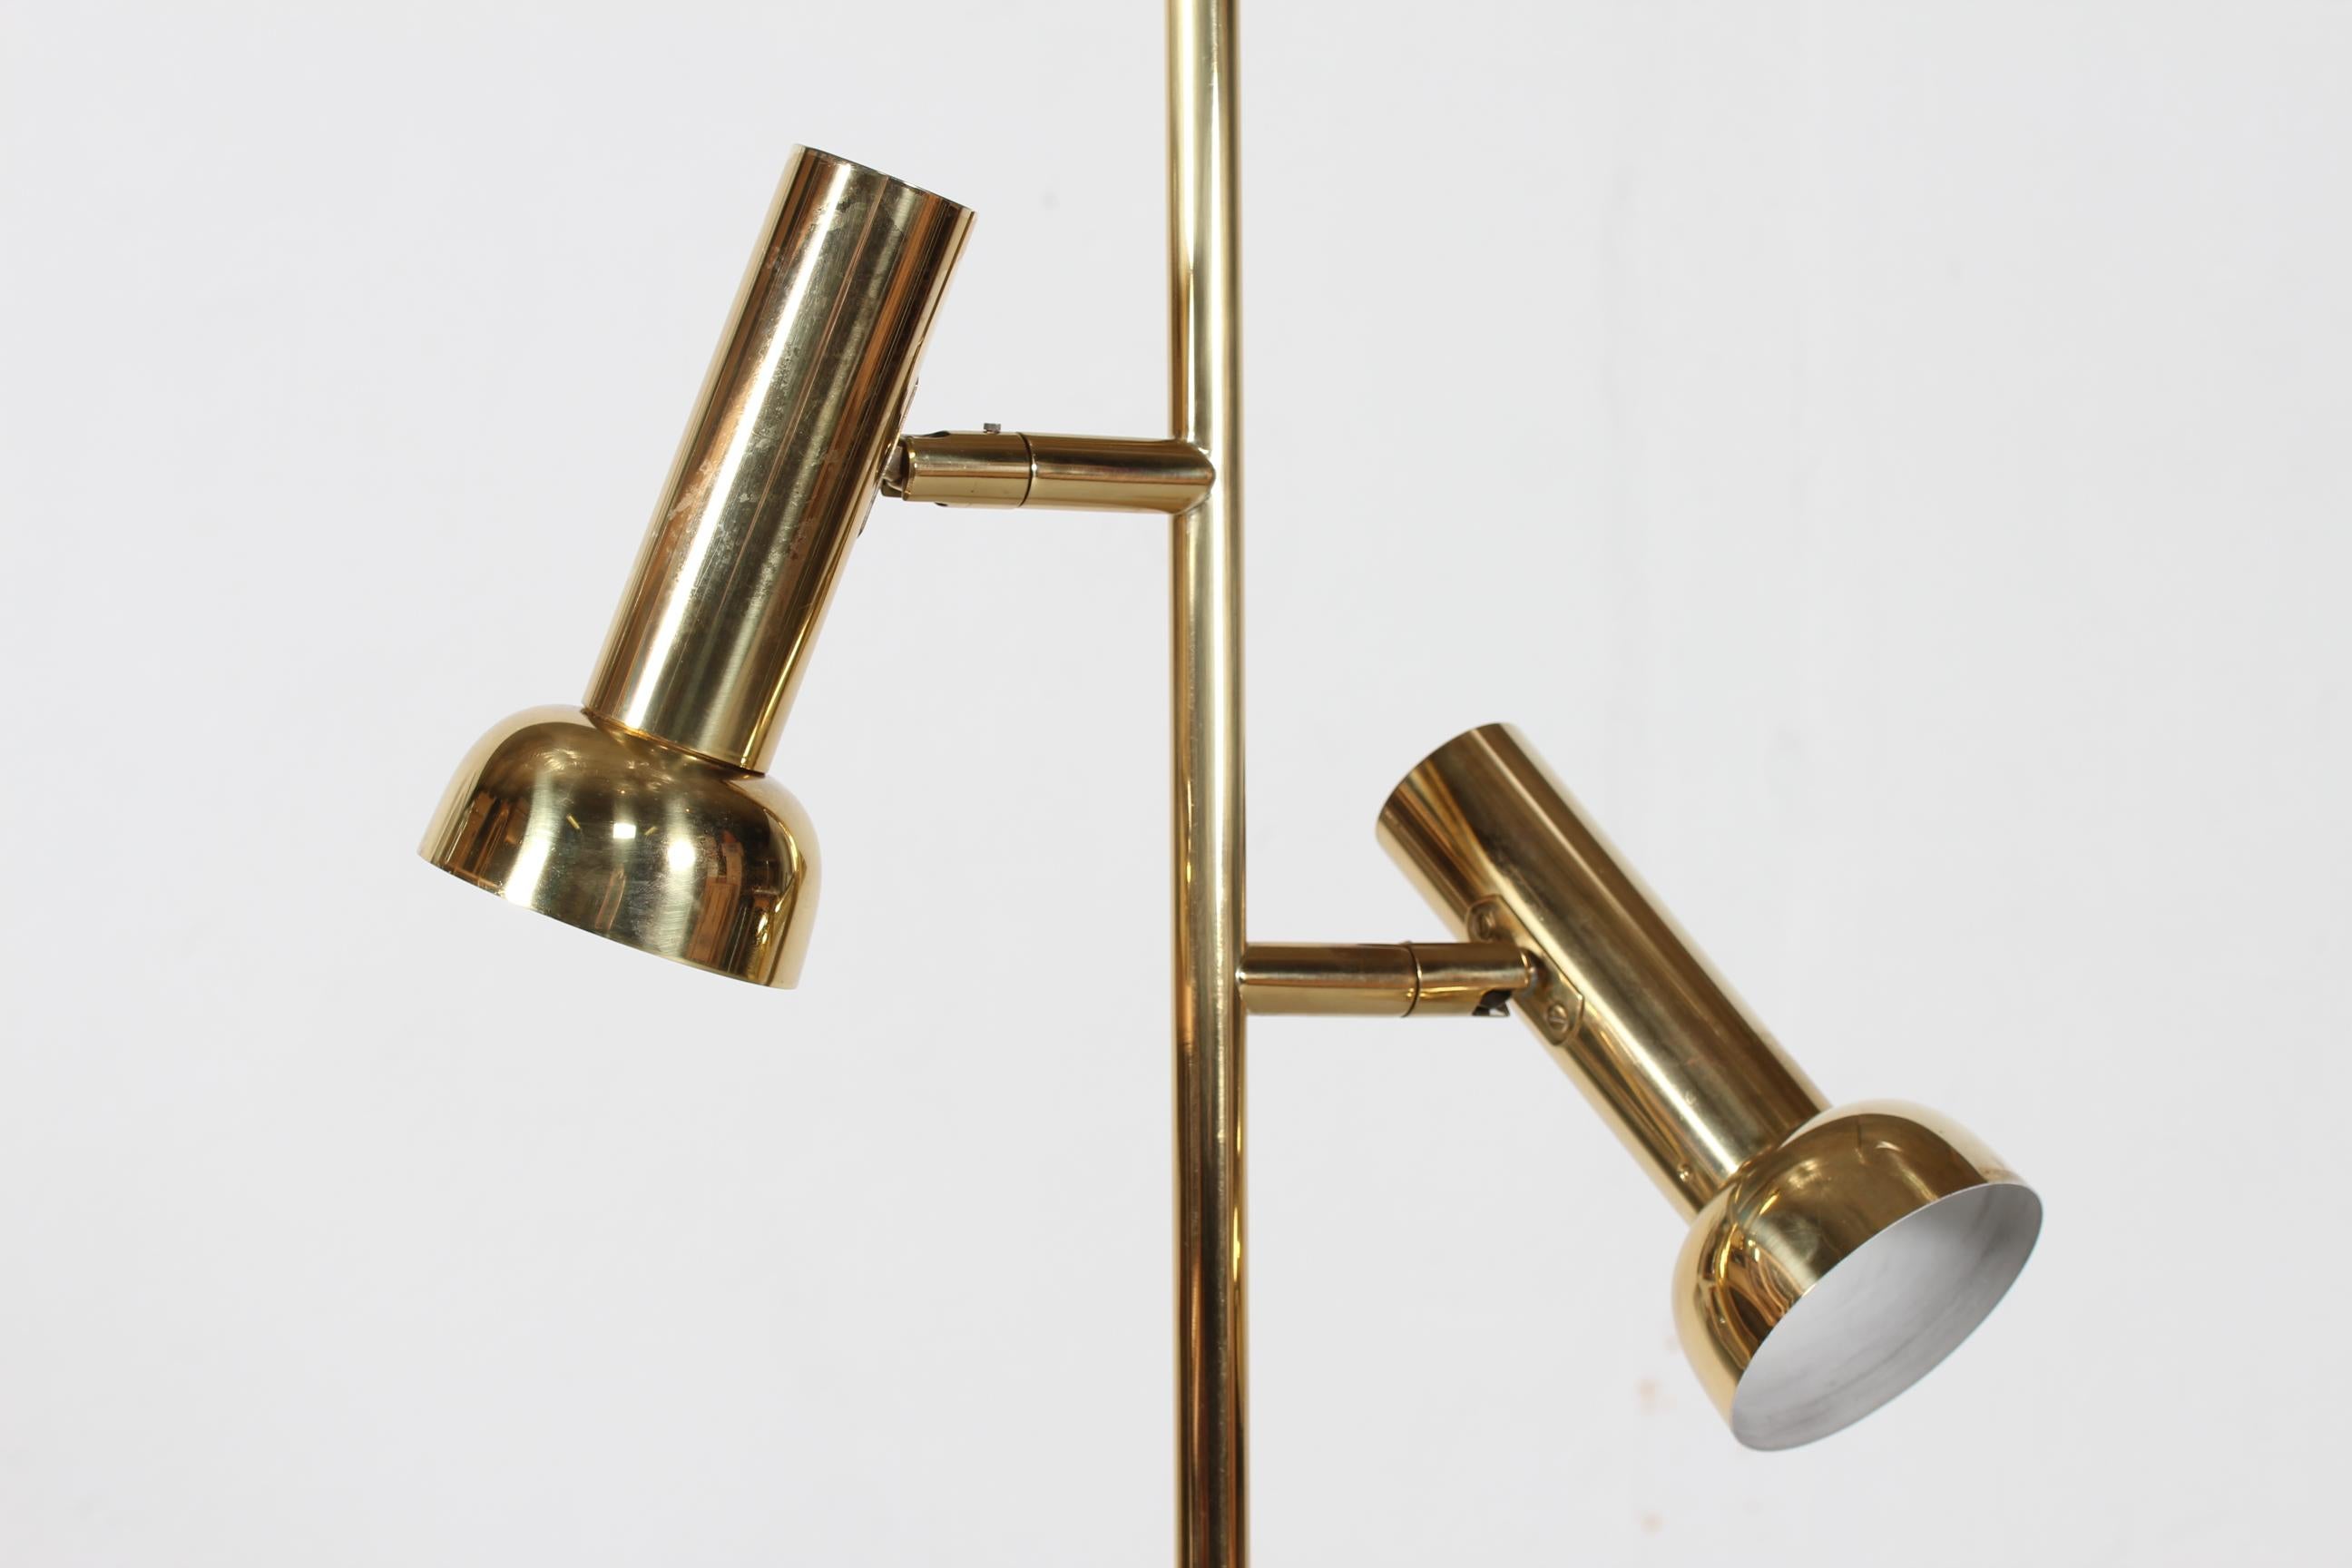 Scandinavian Northern European Floor Lamp of Brass with Lacquer and Adjustable Shades 1970s For Sale